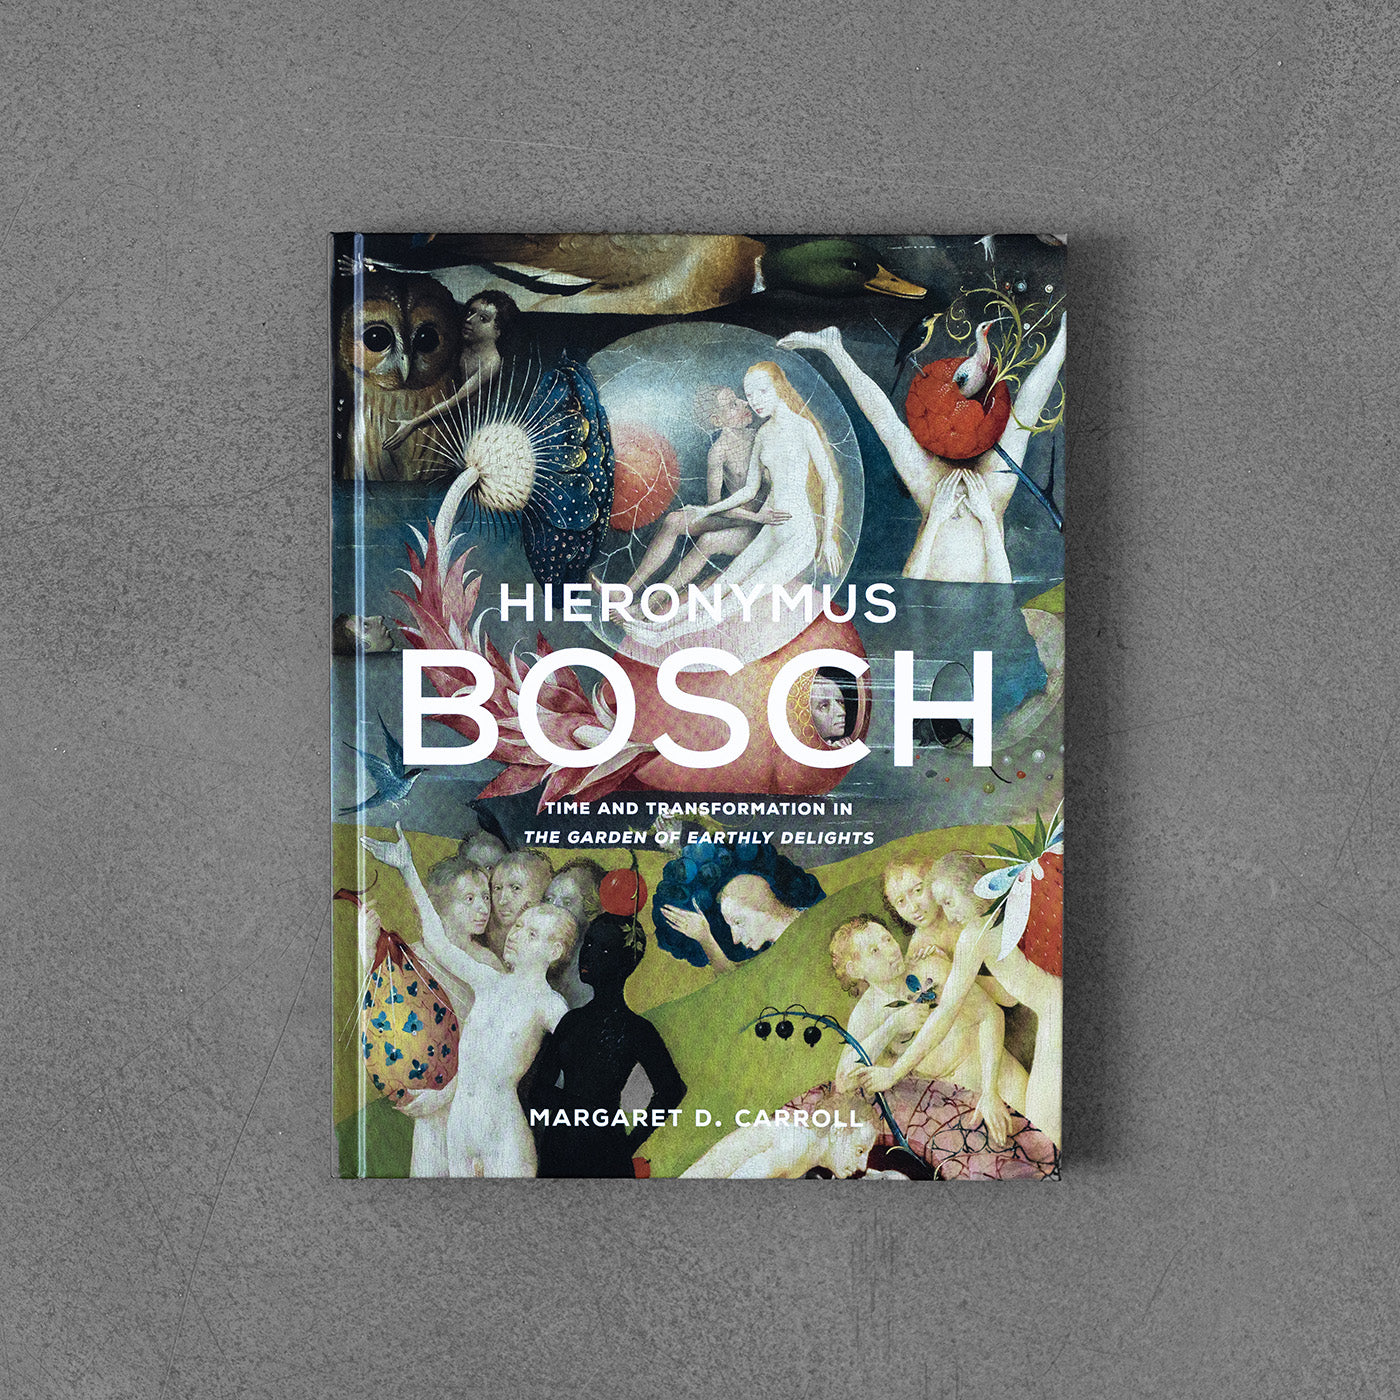 Hieronymus Bosch : Time and Transformation in The Garden of Earthly Delights